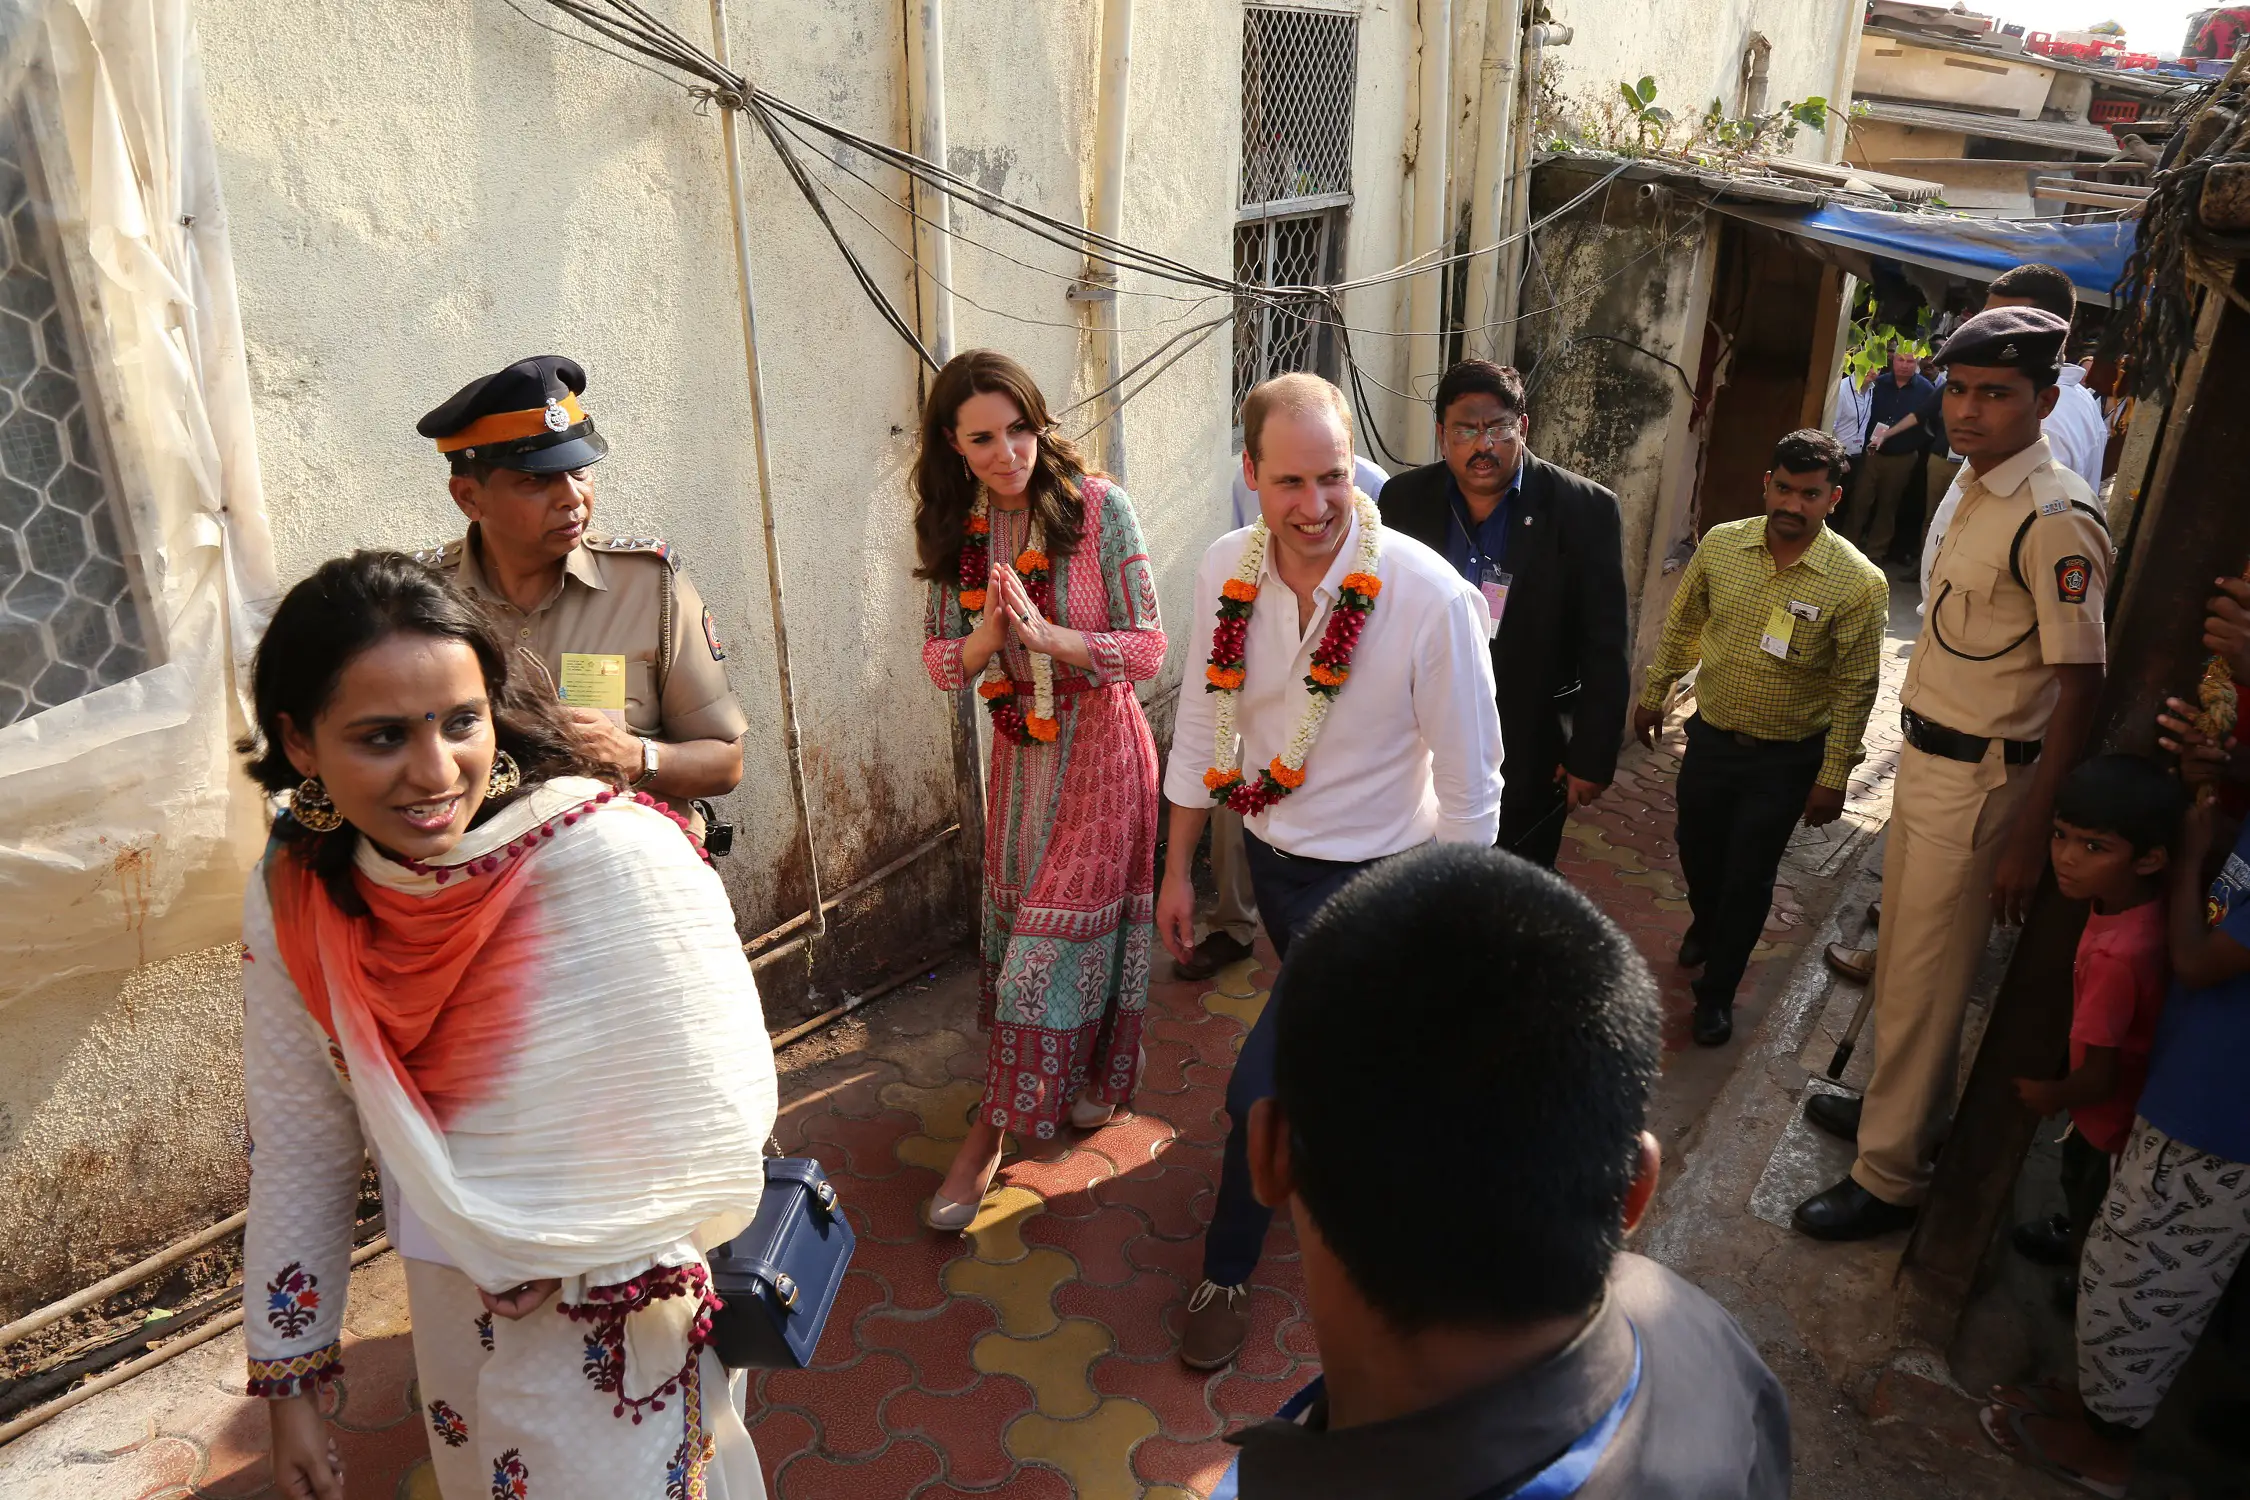 The Duke and Duchess of Cambridge visited the slums in India